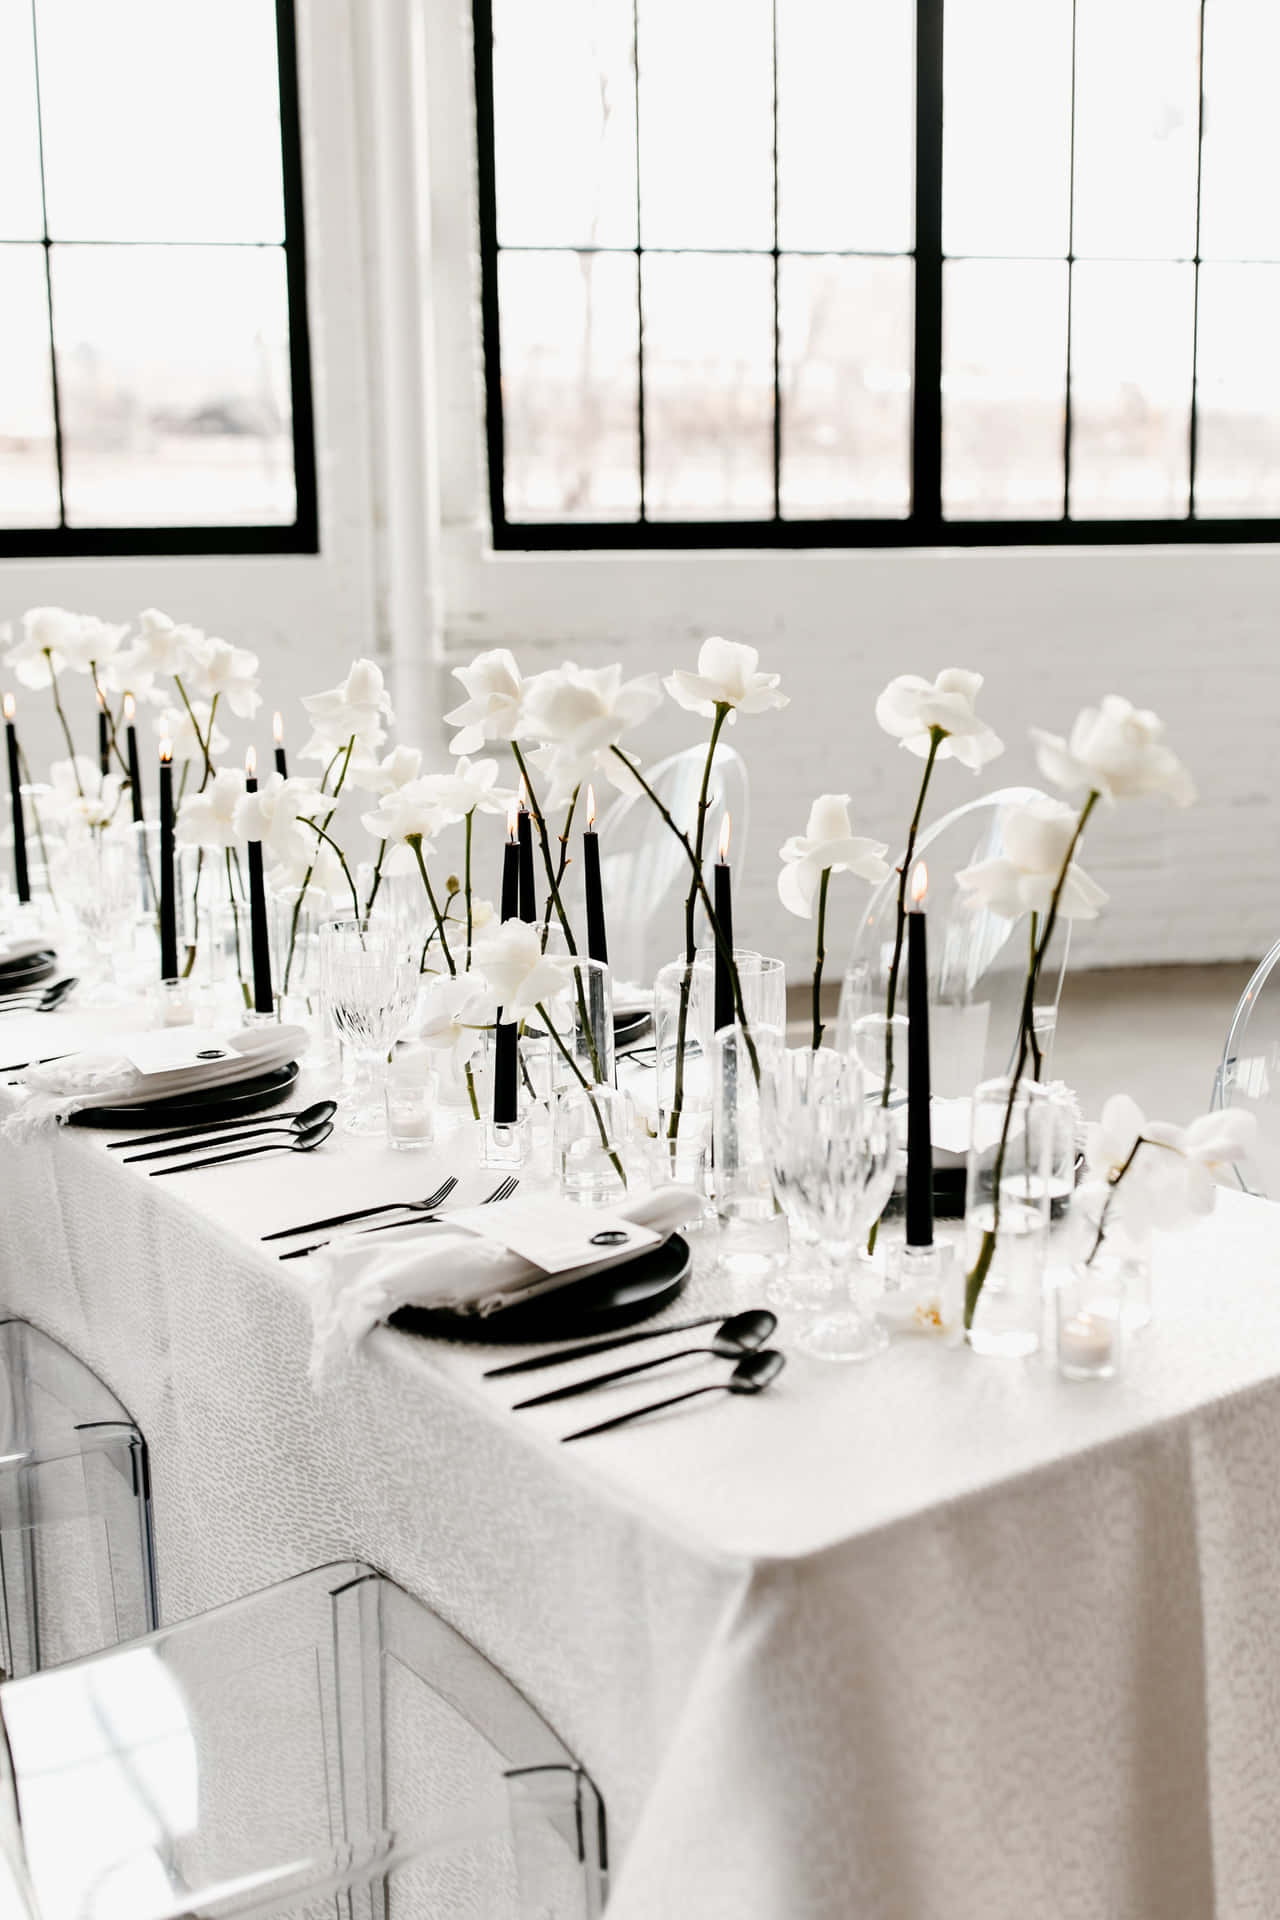 Black And White Elegance: A beautiful and timeless wedding moment Wallpaper